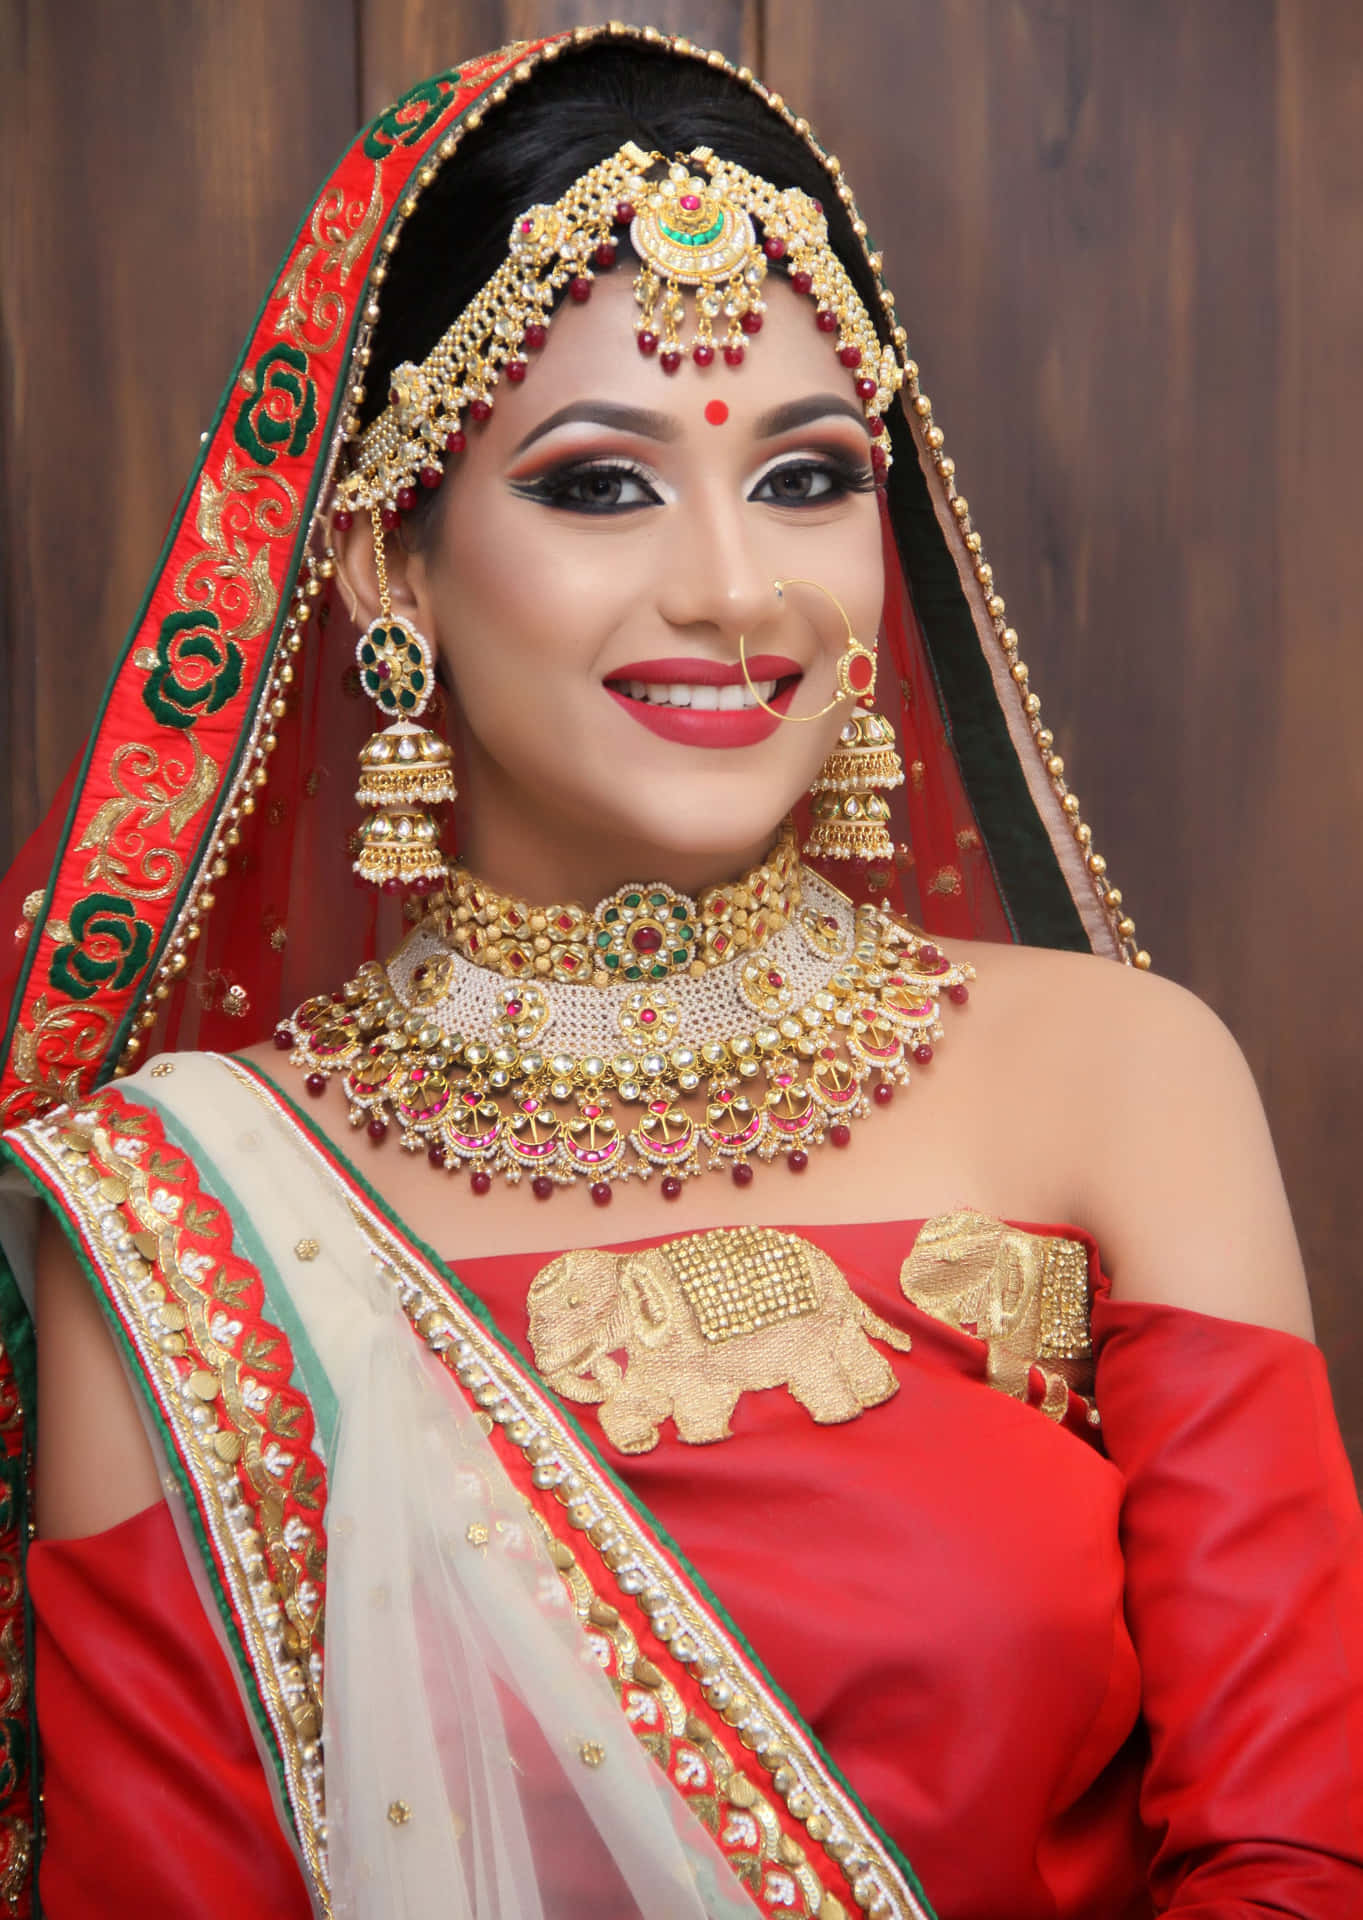 Elegance personified: a mesmerizing Indian bride in traditional attire.